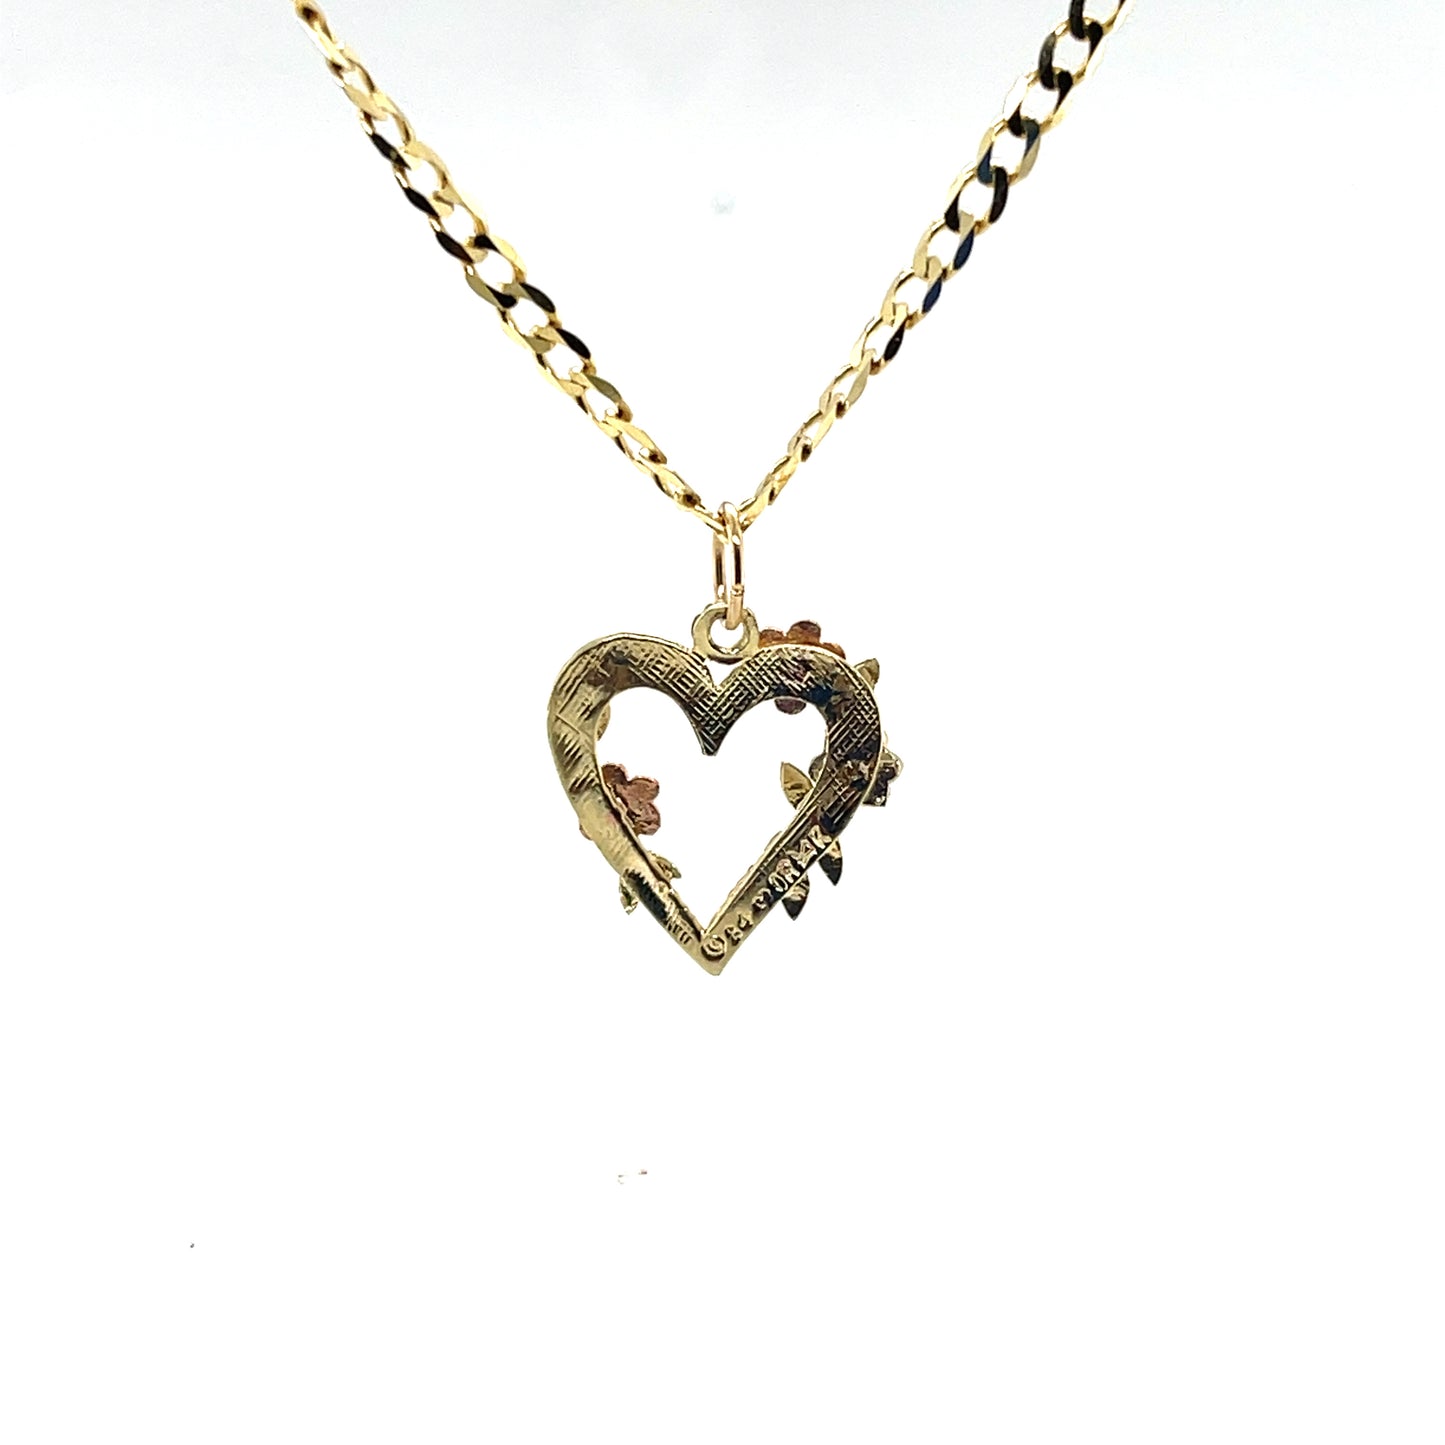 Heart with Flowers Estate Necklace in 14-Karat Yellow, White, and Pink Gold